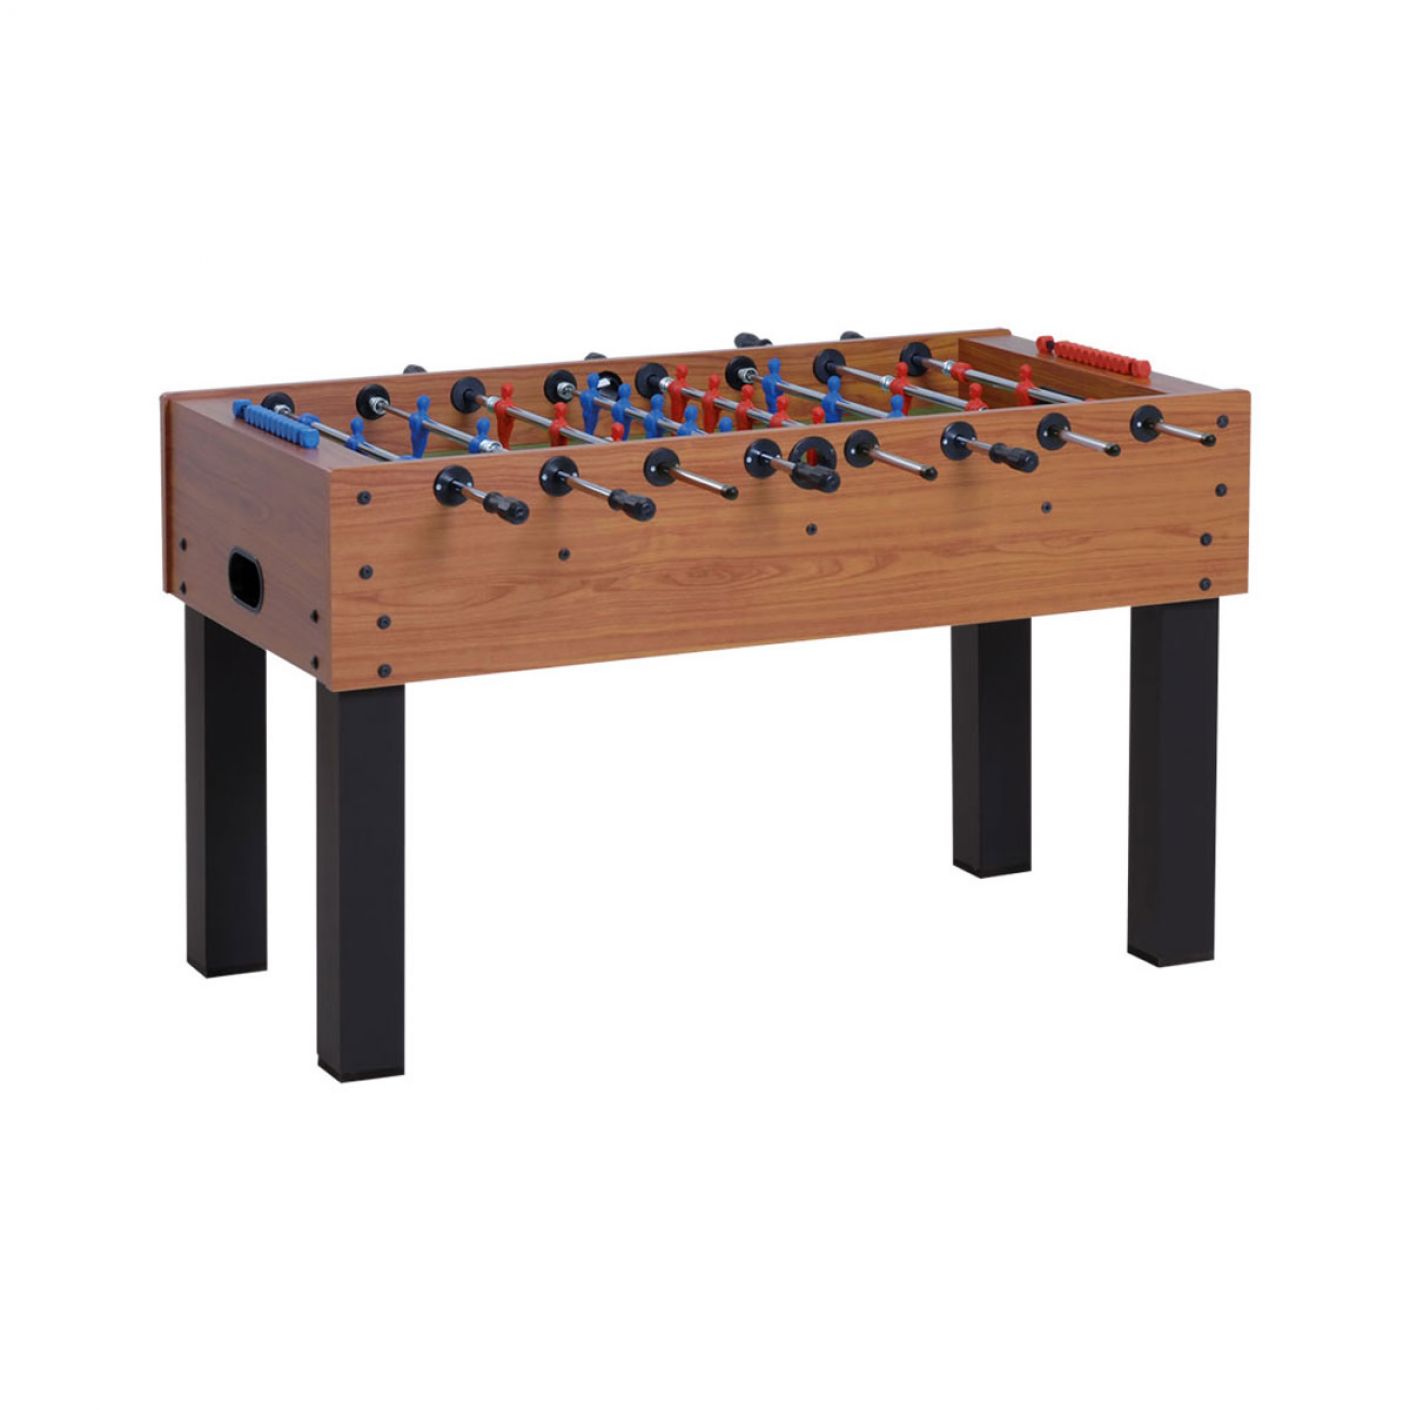 Garlando F-100 cherry table football with outgoing temples